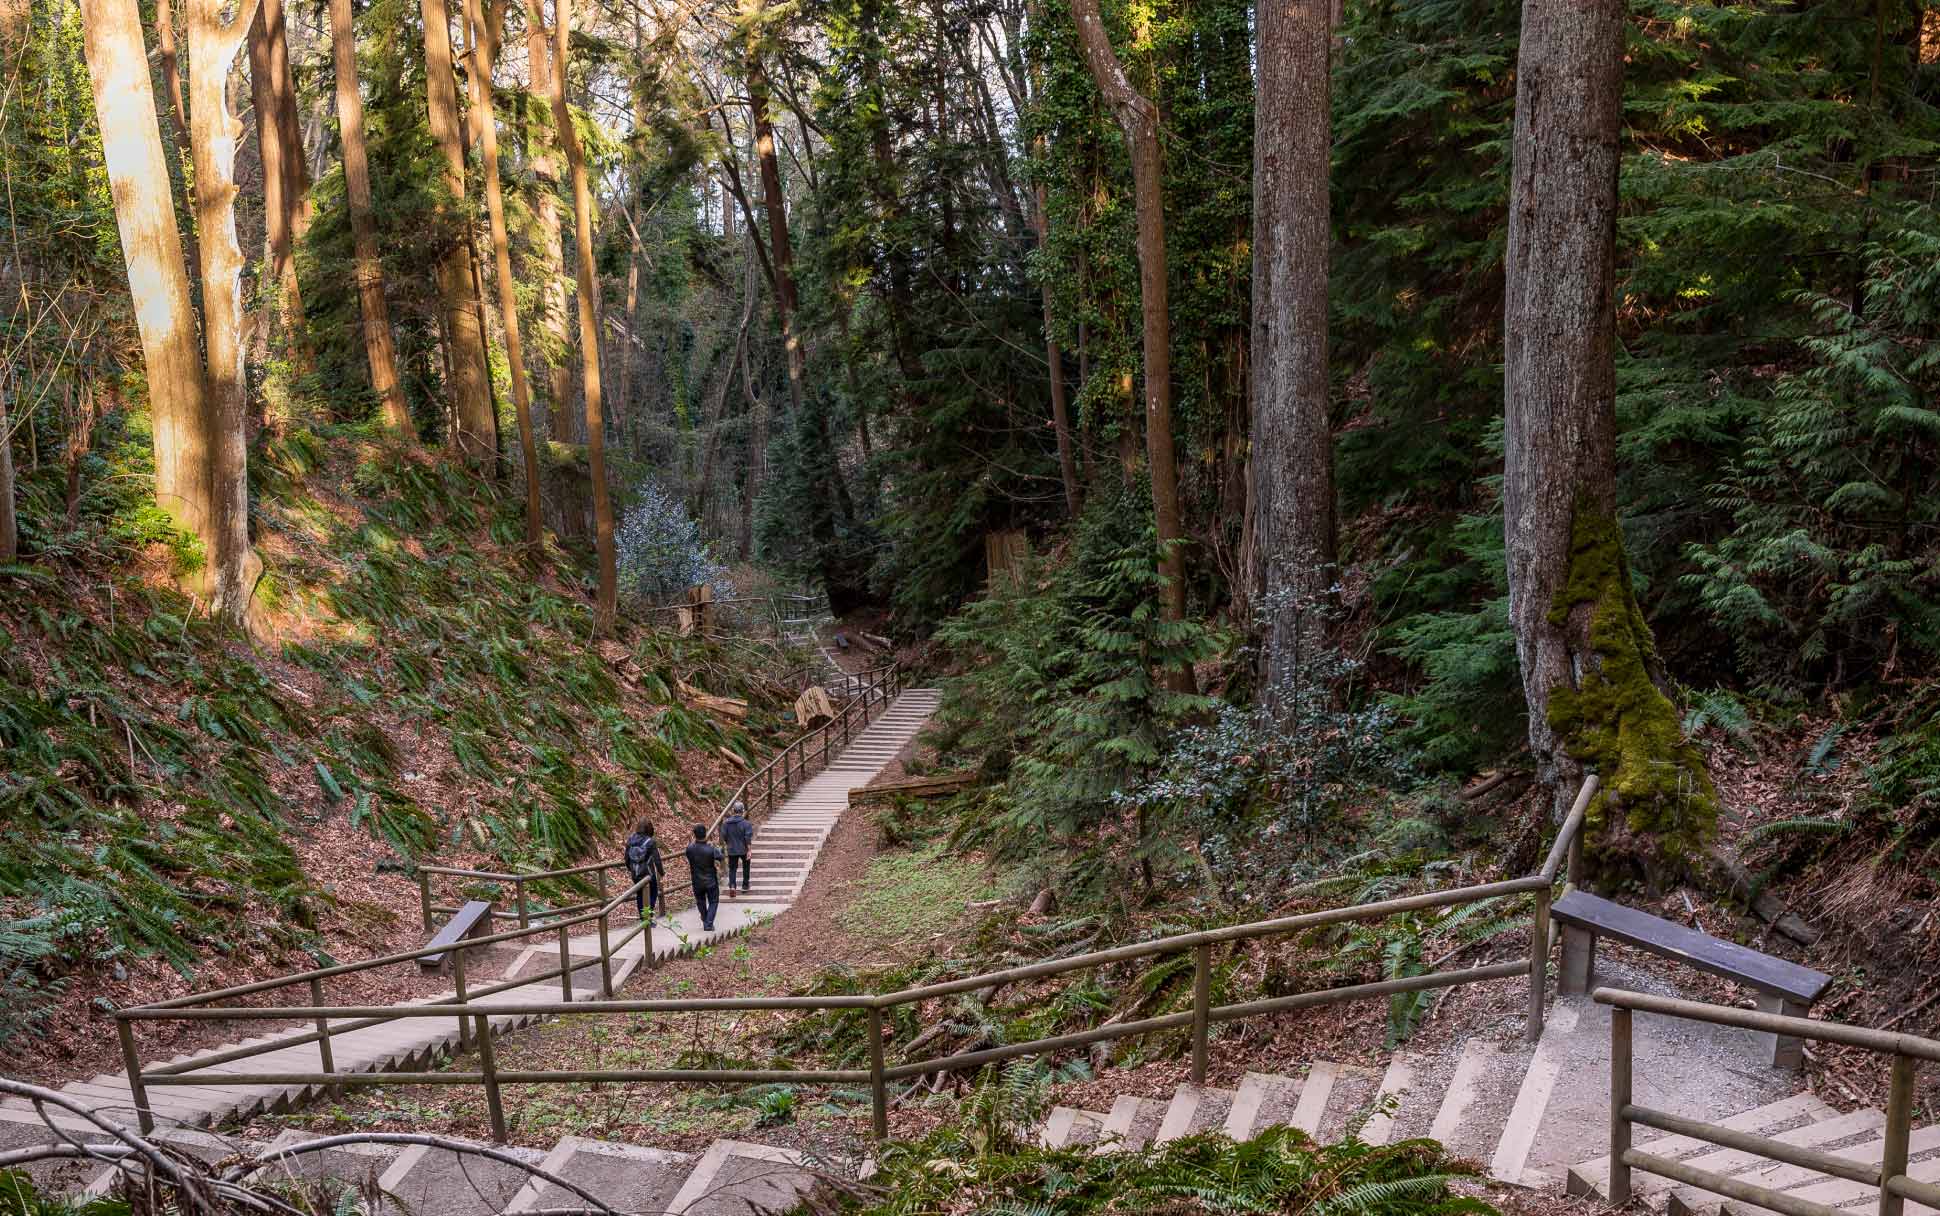 Visitors climb up stairs in on a trail through the trees of Pacific Spirit Park in Vancouver.